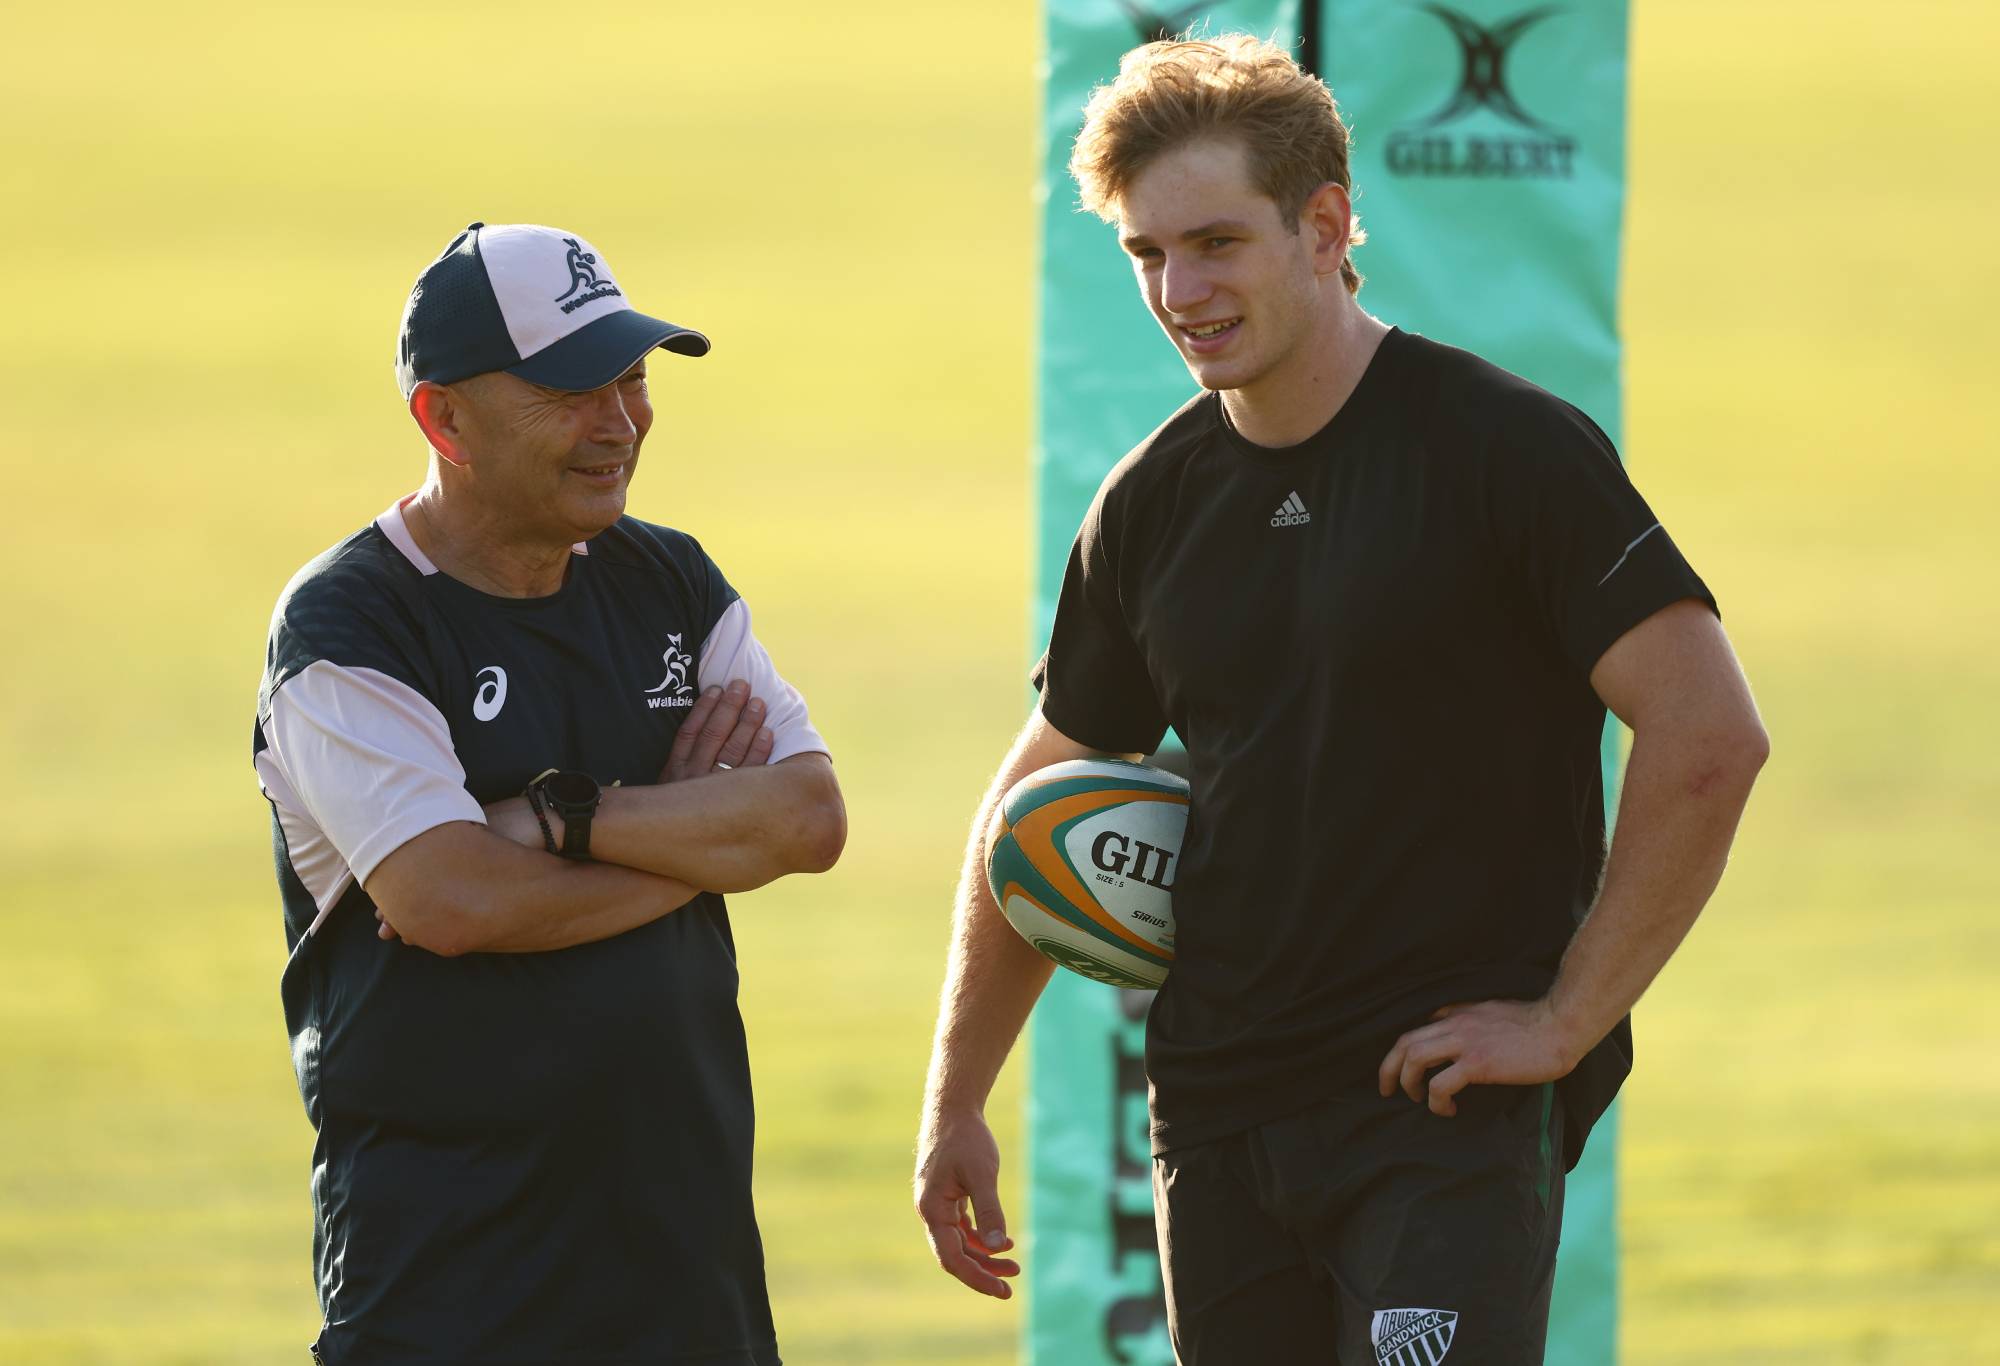 Wallabies coach Eddie Jones talks with Max Jorgensen during an Australia Wallabies training camp at Sanctuary Cove on April 17, 2023 in Gold Coast, Australia. (Photo by Chris Hyde/Getty Images)